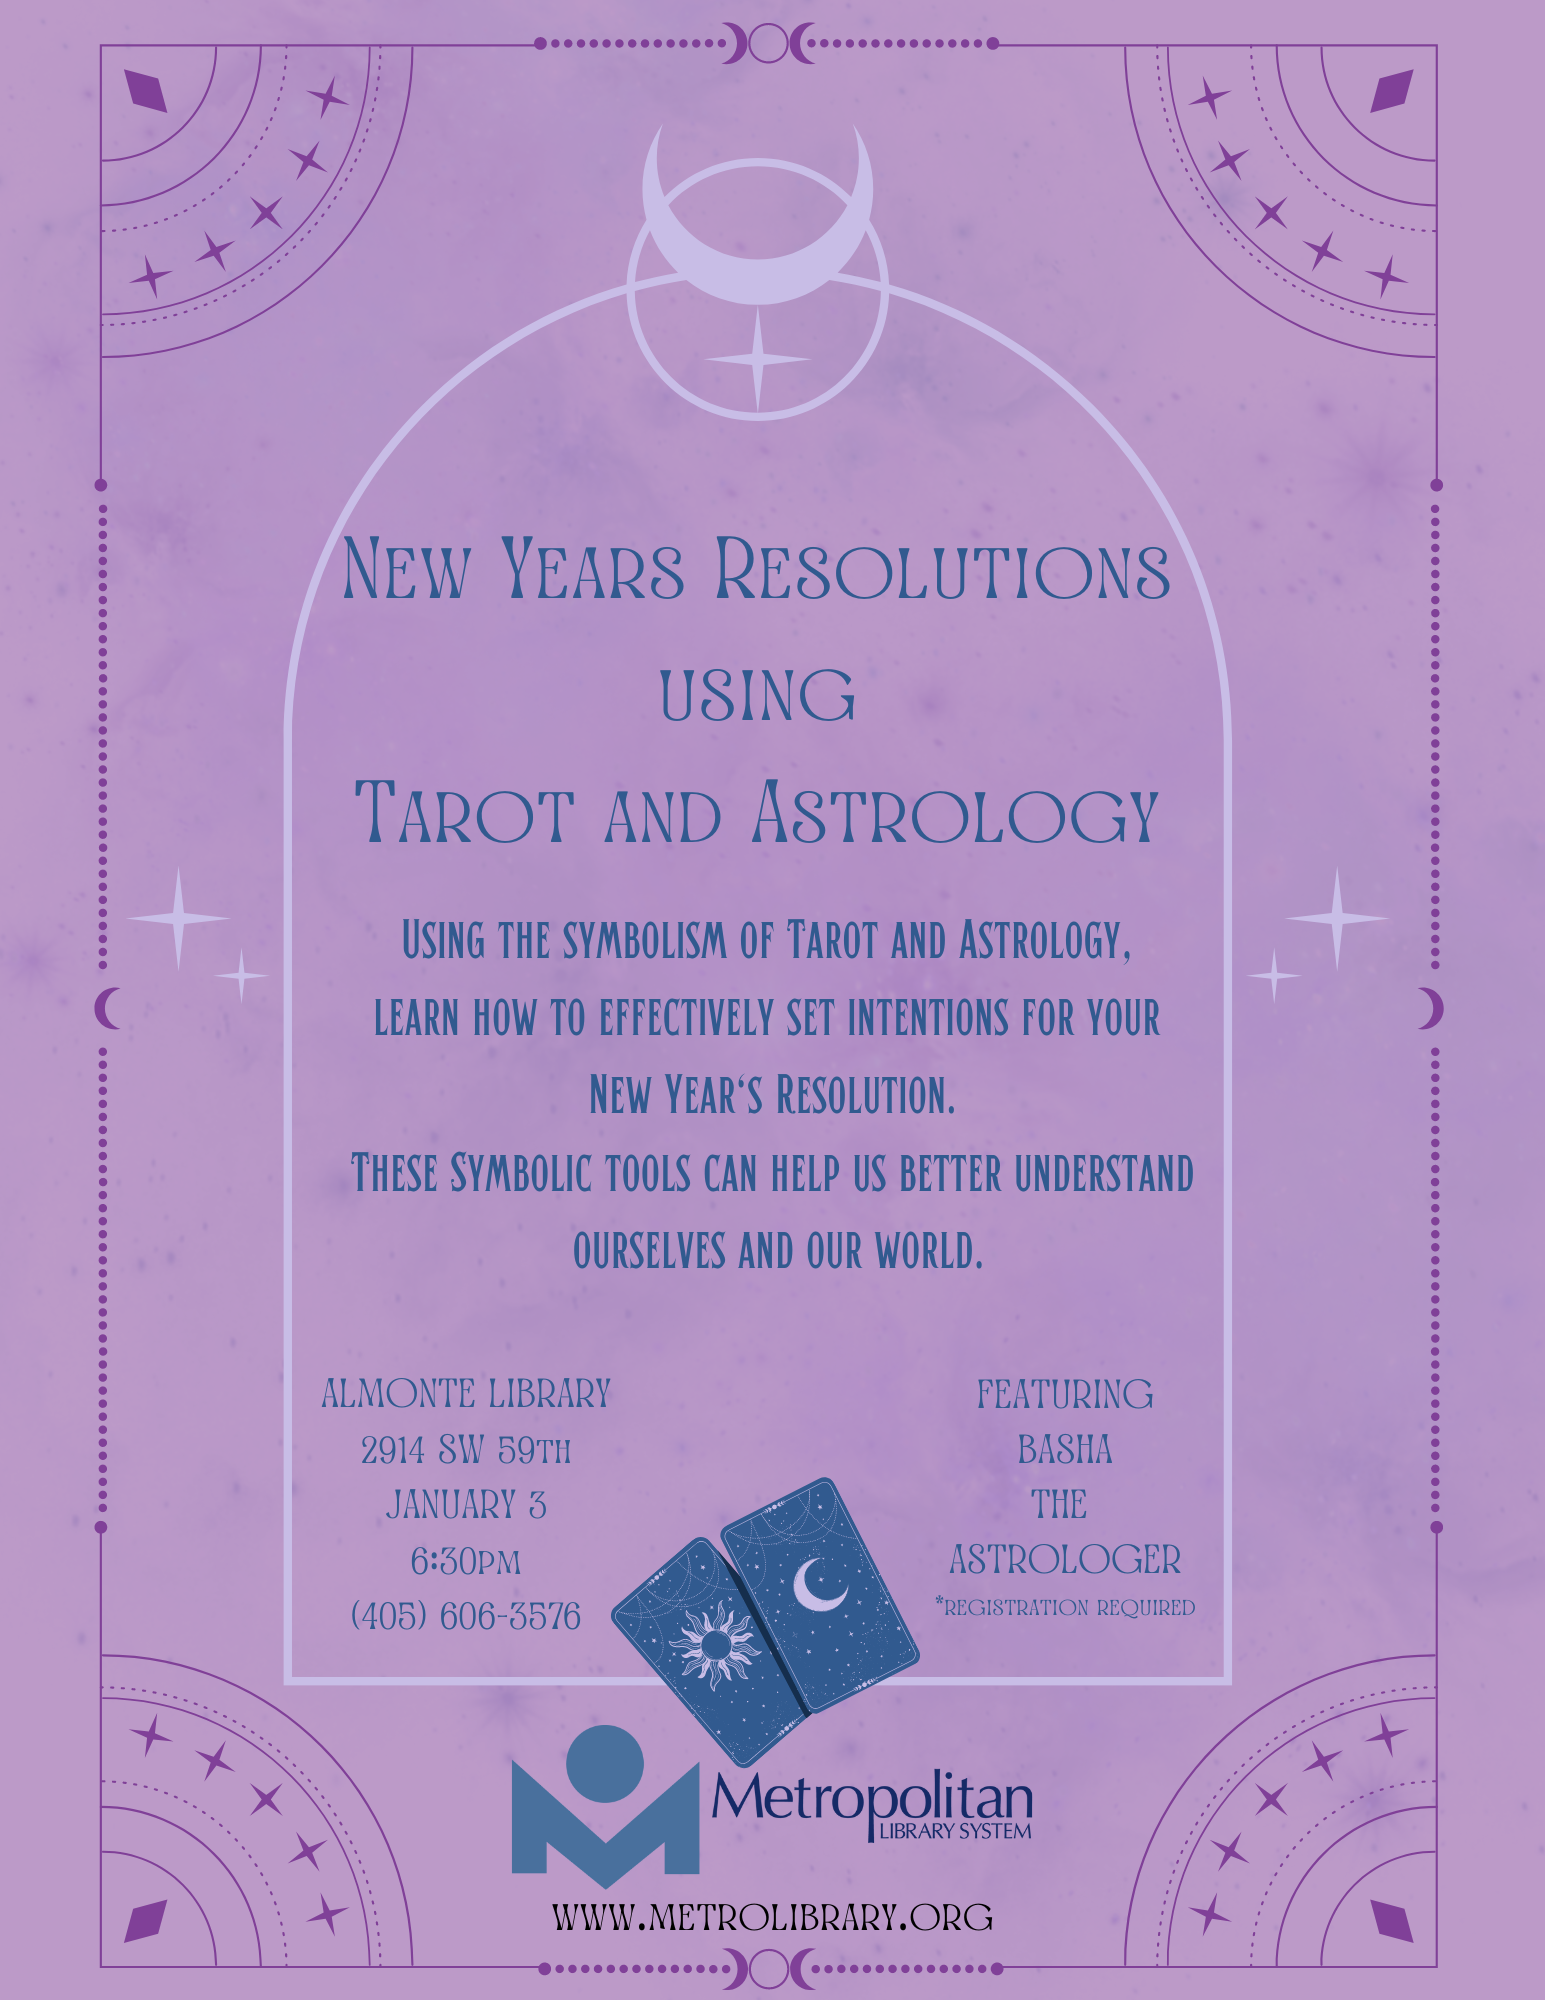 New Years Resolutions using Tarot and Astrology